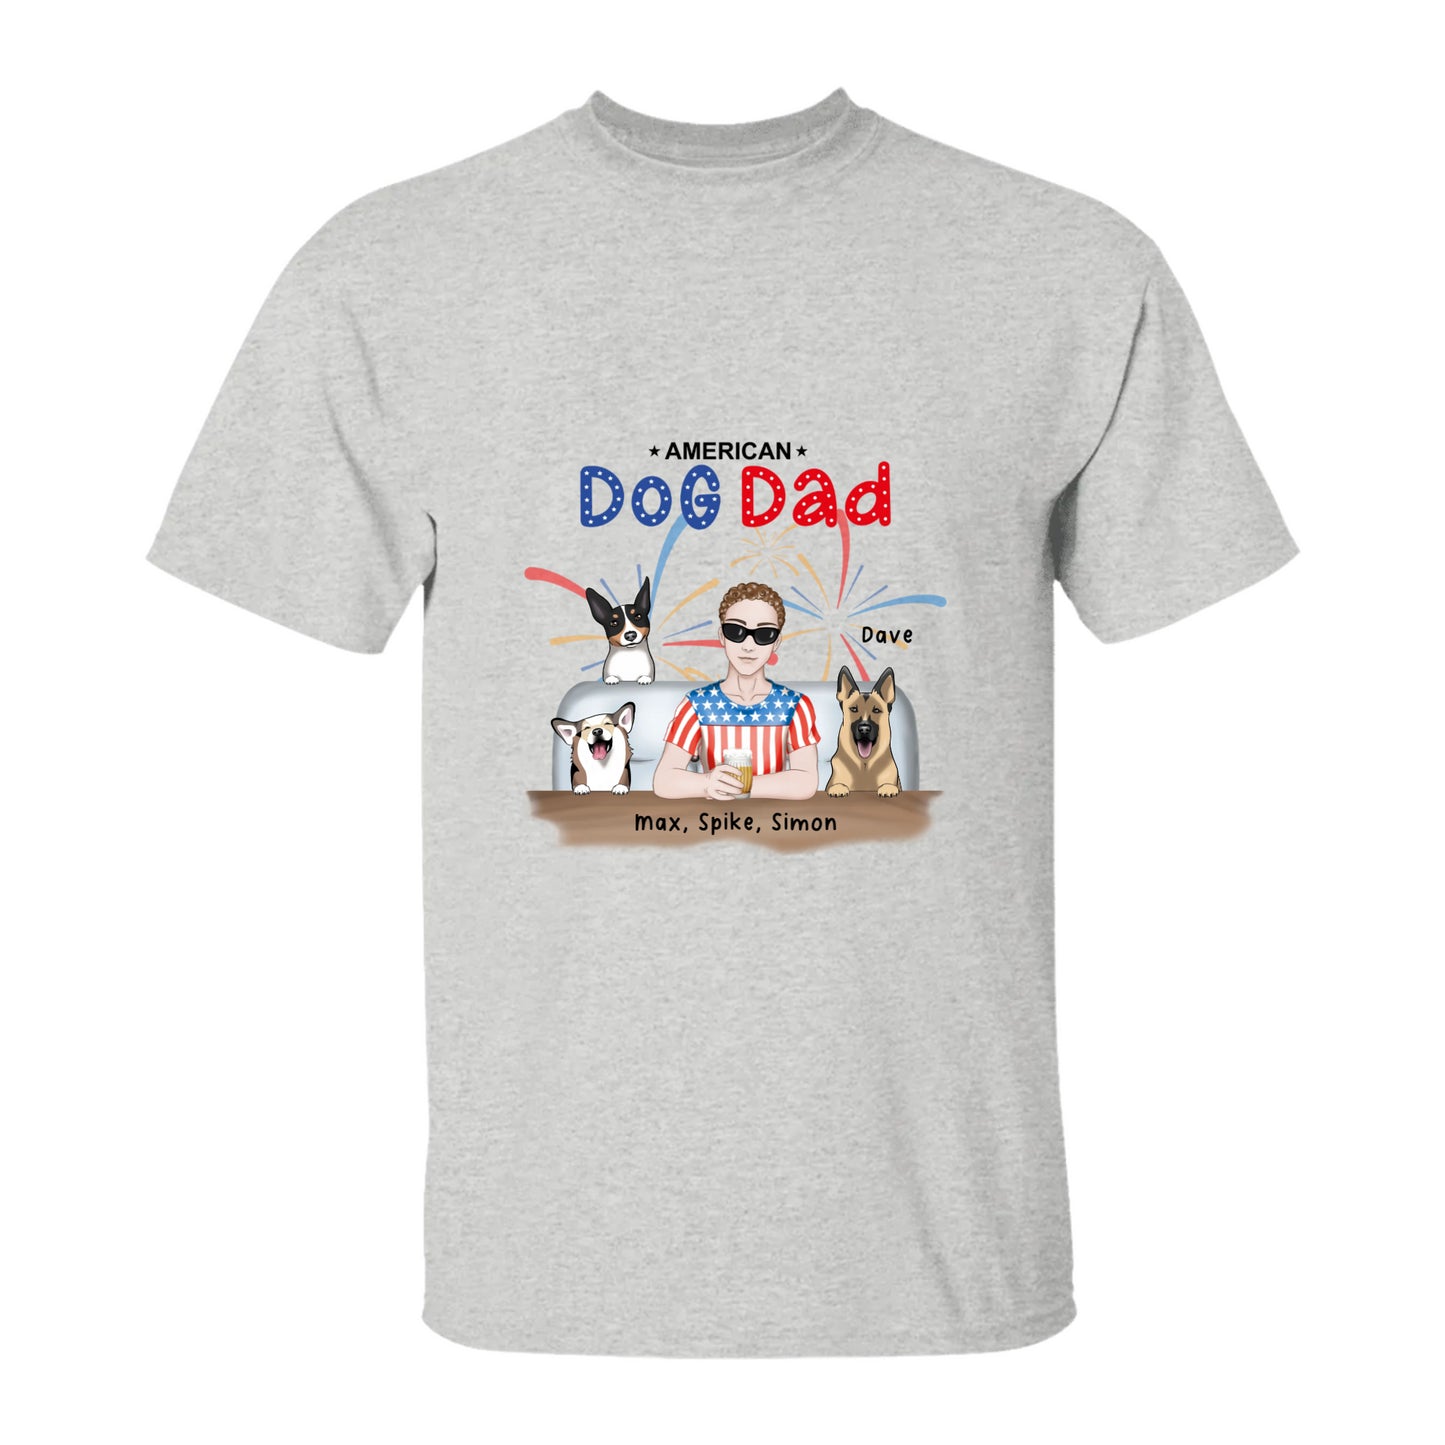 Dog Dad Red White and Blue Patriotic T-Shirt